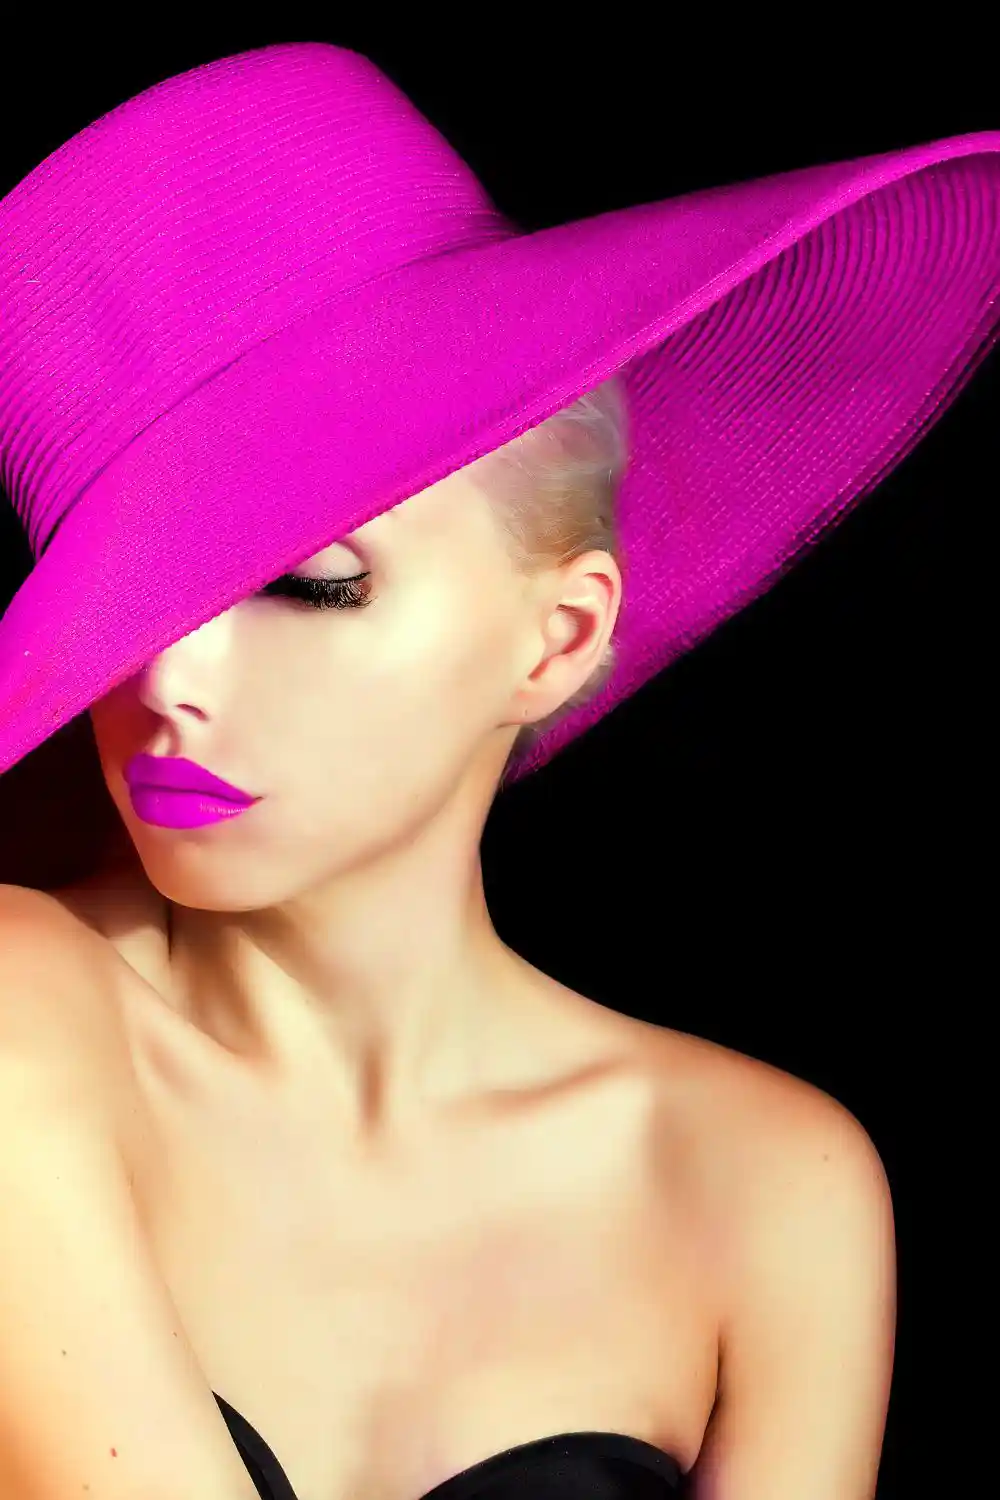 Lady in a pink hat